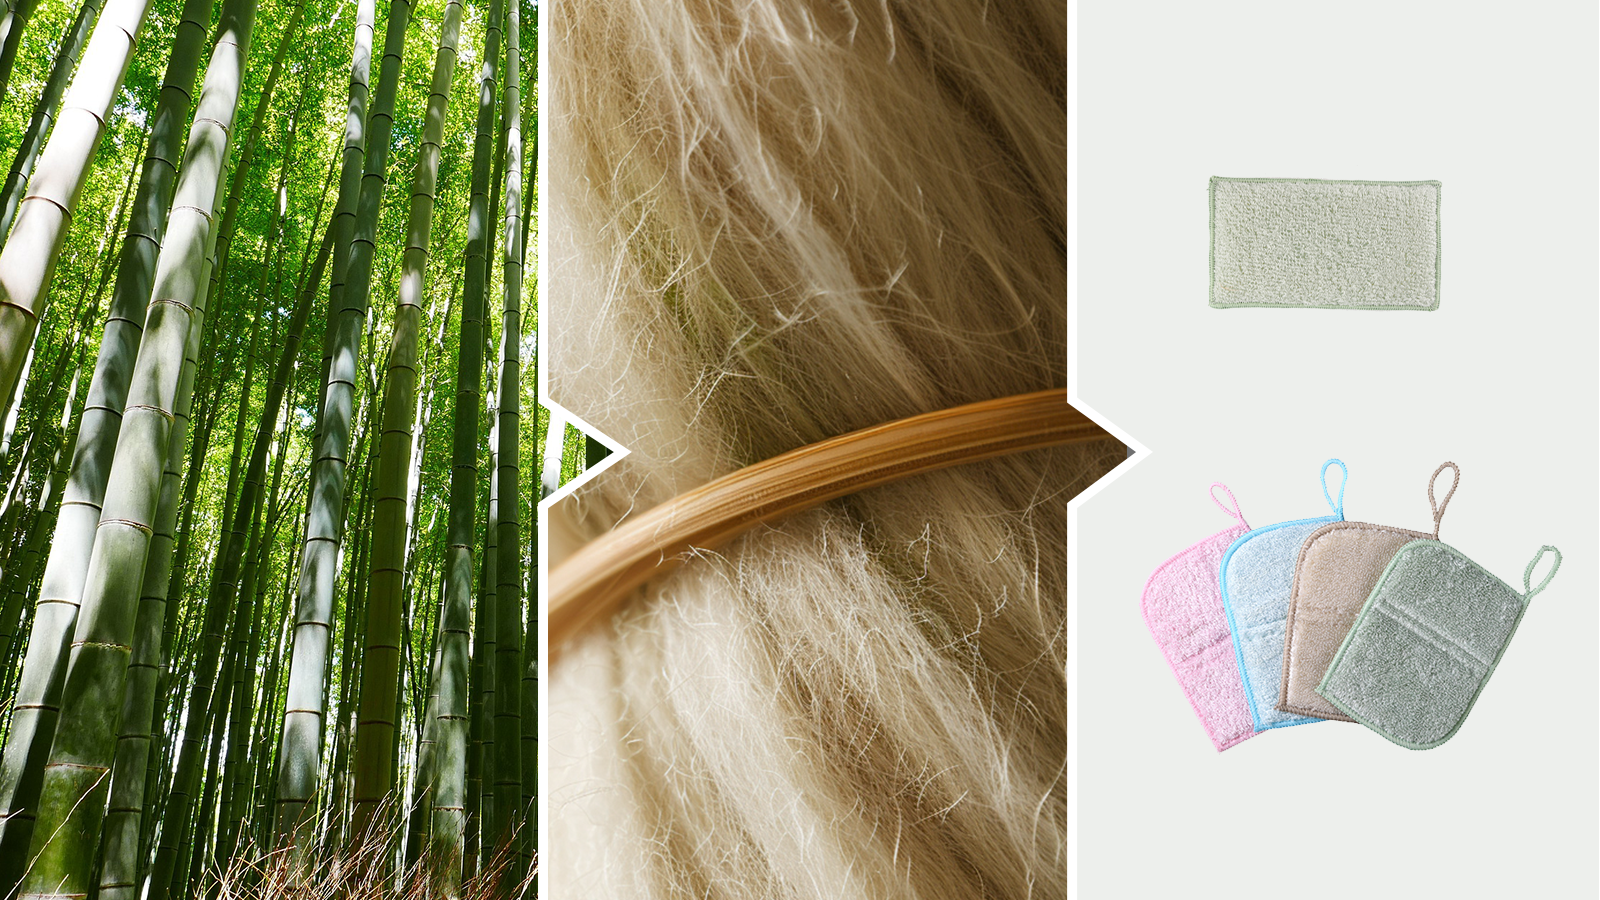 Bamboo fiber sponges are derived from bamboo plants, known for their rapid growth.